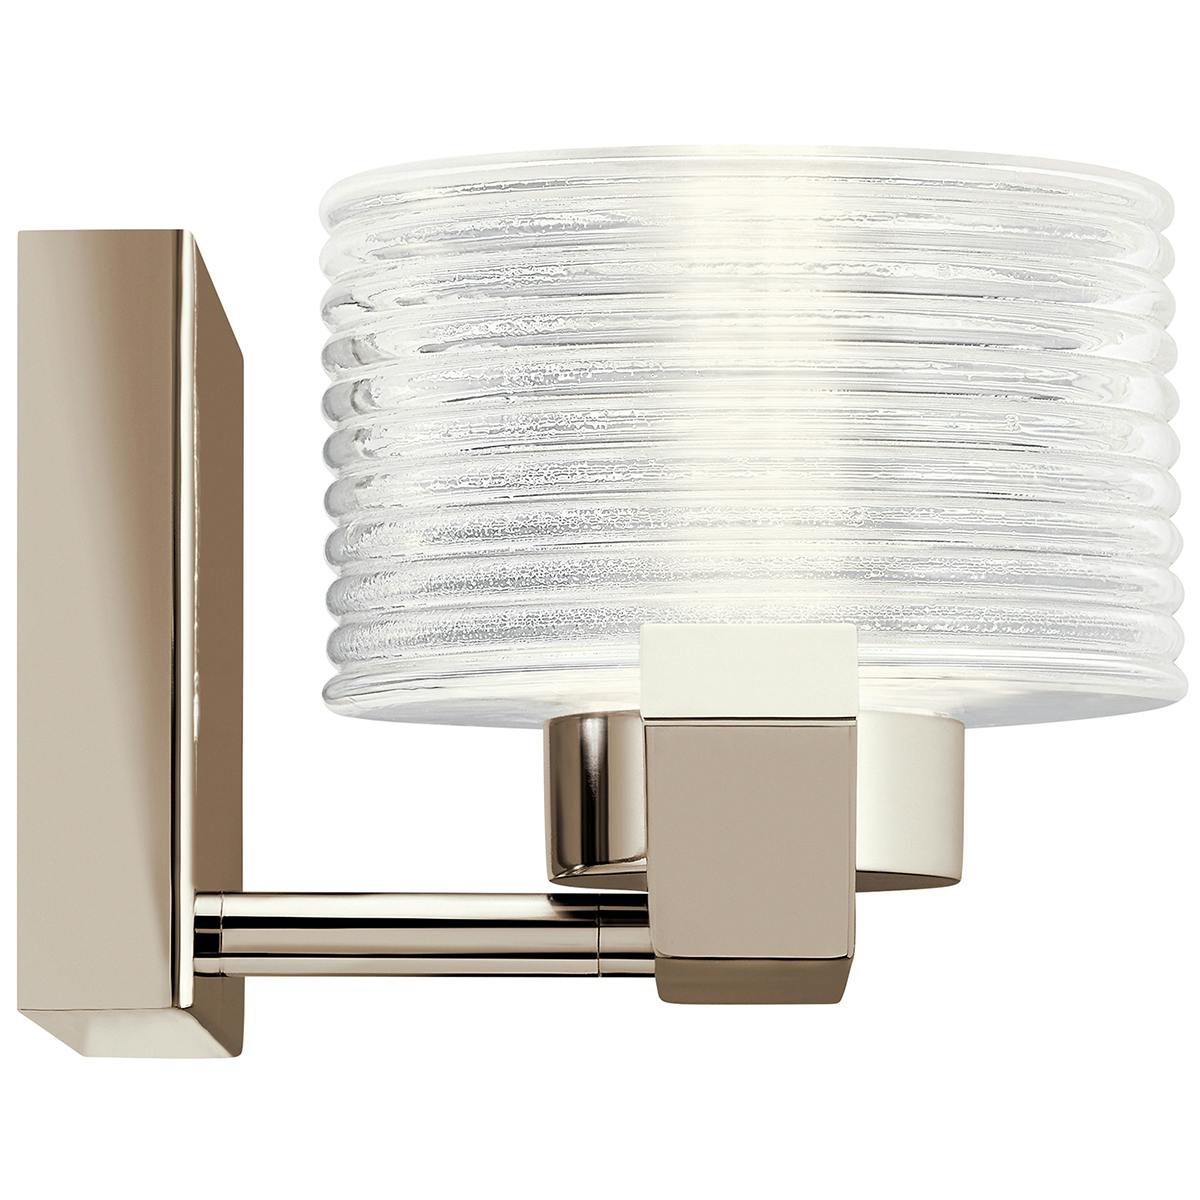 Profile view of the Lasus 1 Light LED Sconce Polished Nickel on a white background